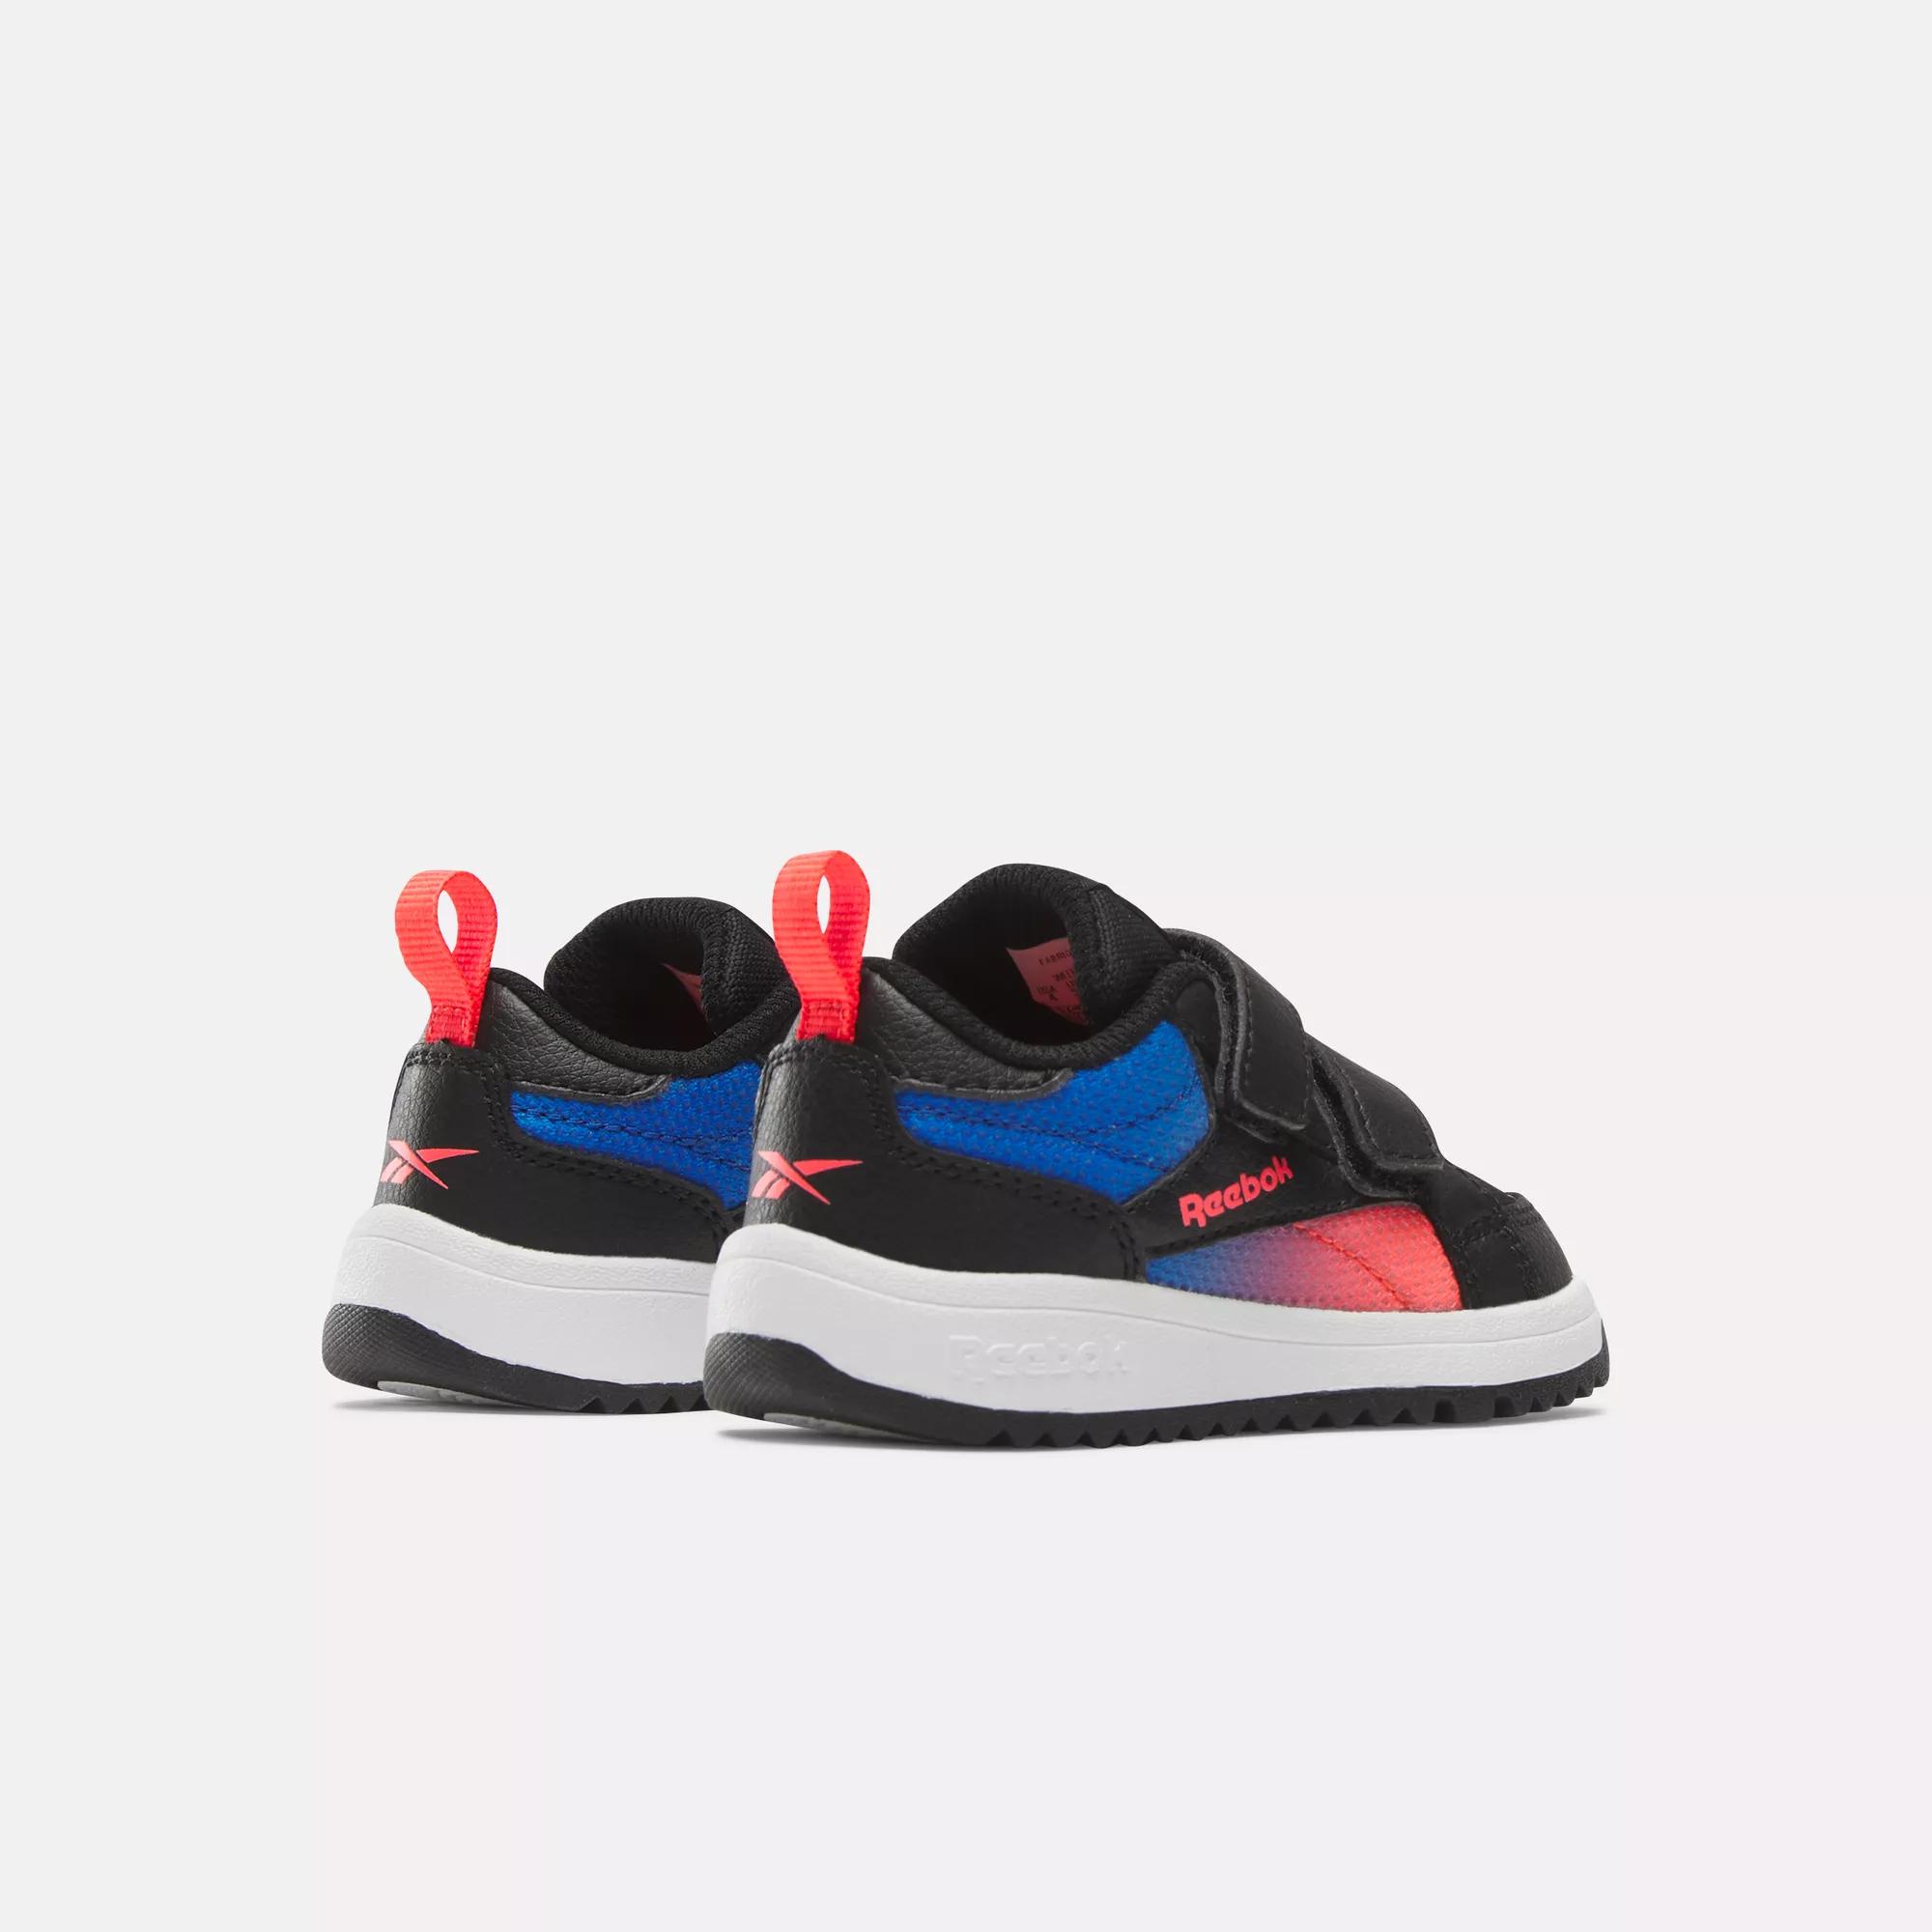 Weebok Clasp Low Shoes - Toddler - Electric Cobalt / Core Black / Neon  Cherry | Reebok